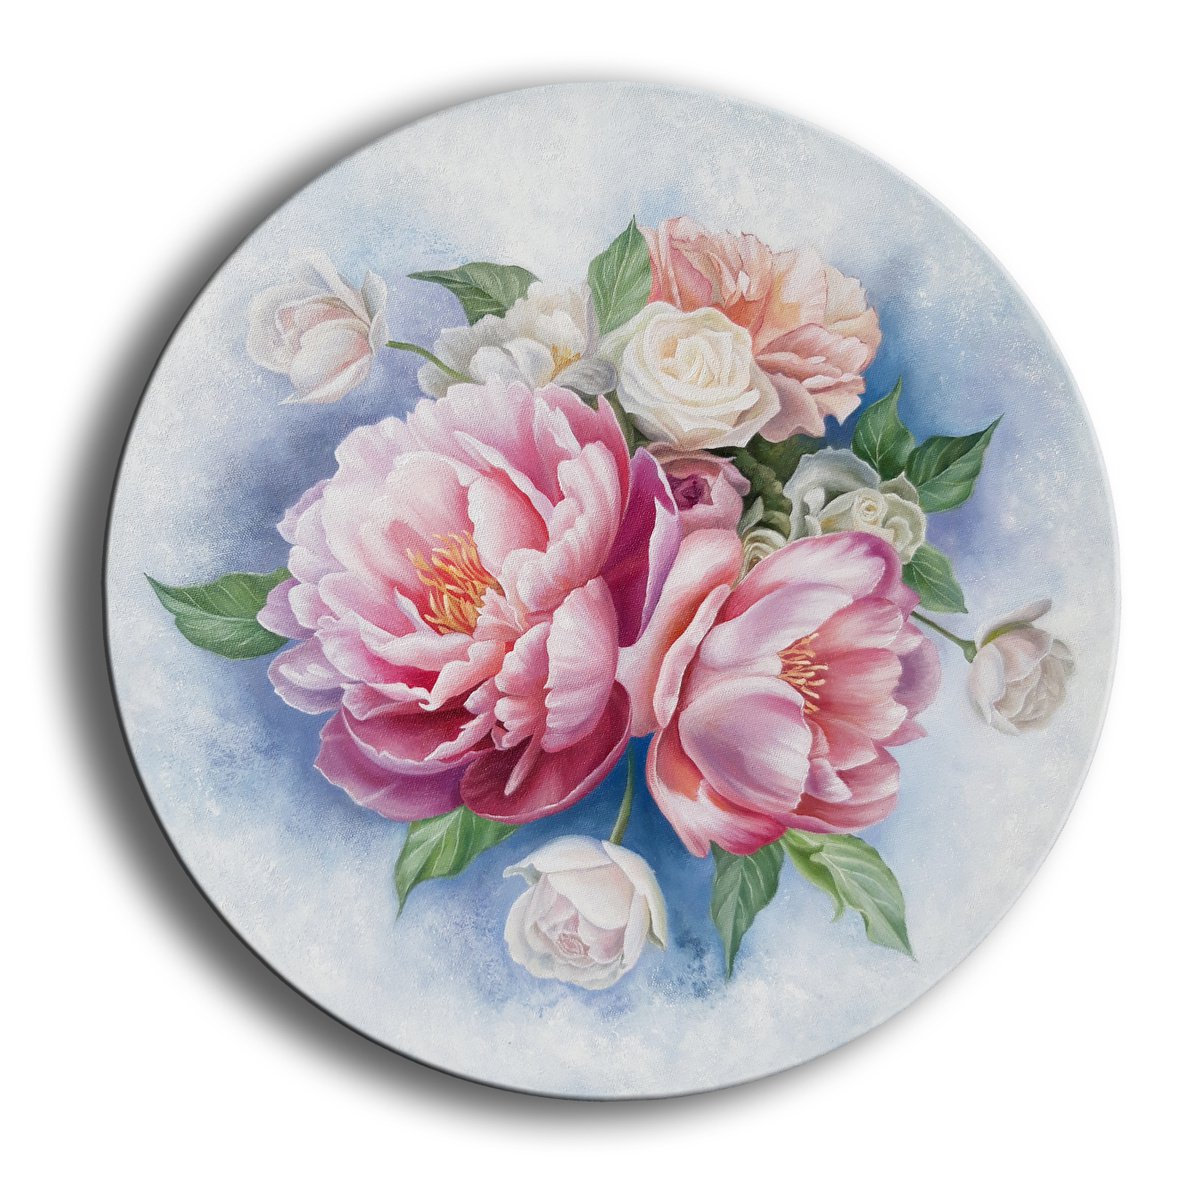 Inspiration, oil circle canvas floral painting, peonies art by Anna Steshenko